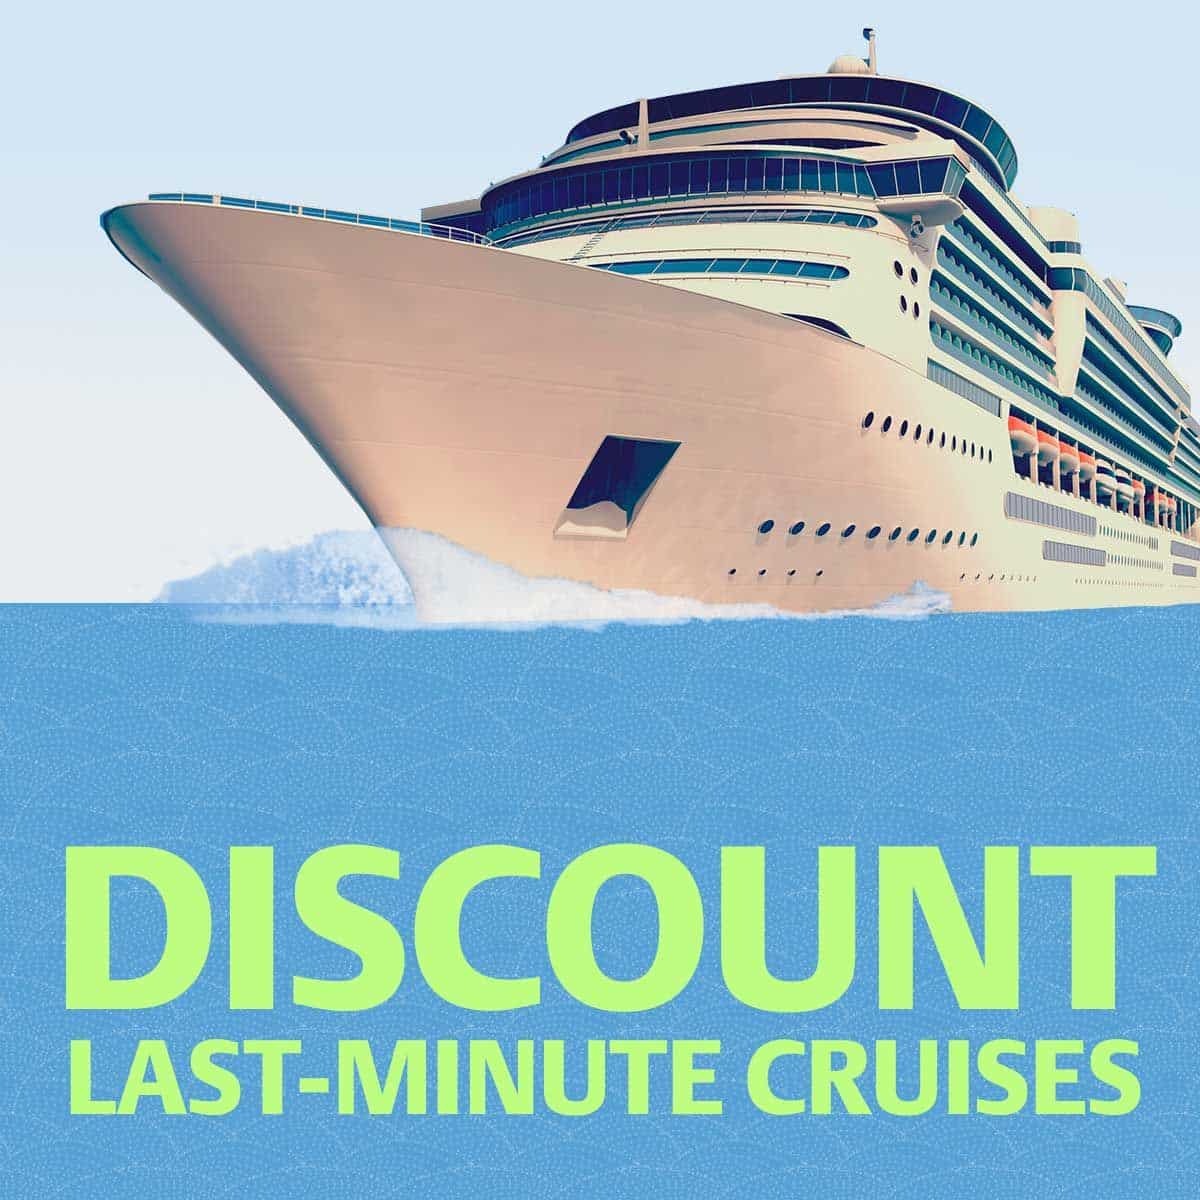 Incredible deals on the best cruises! Buy a last